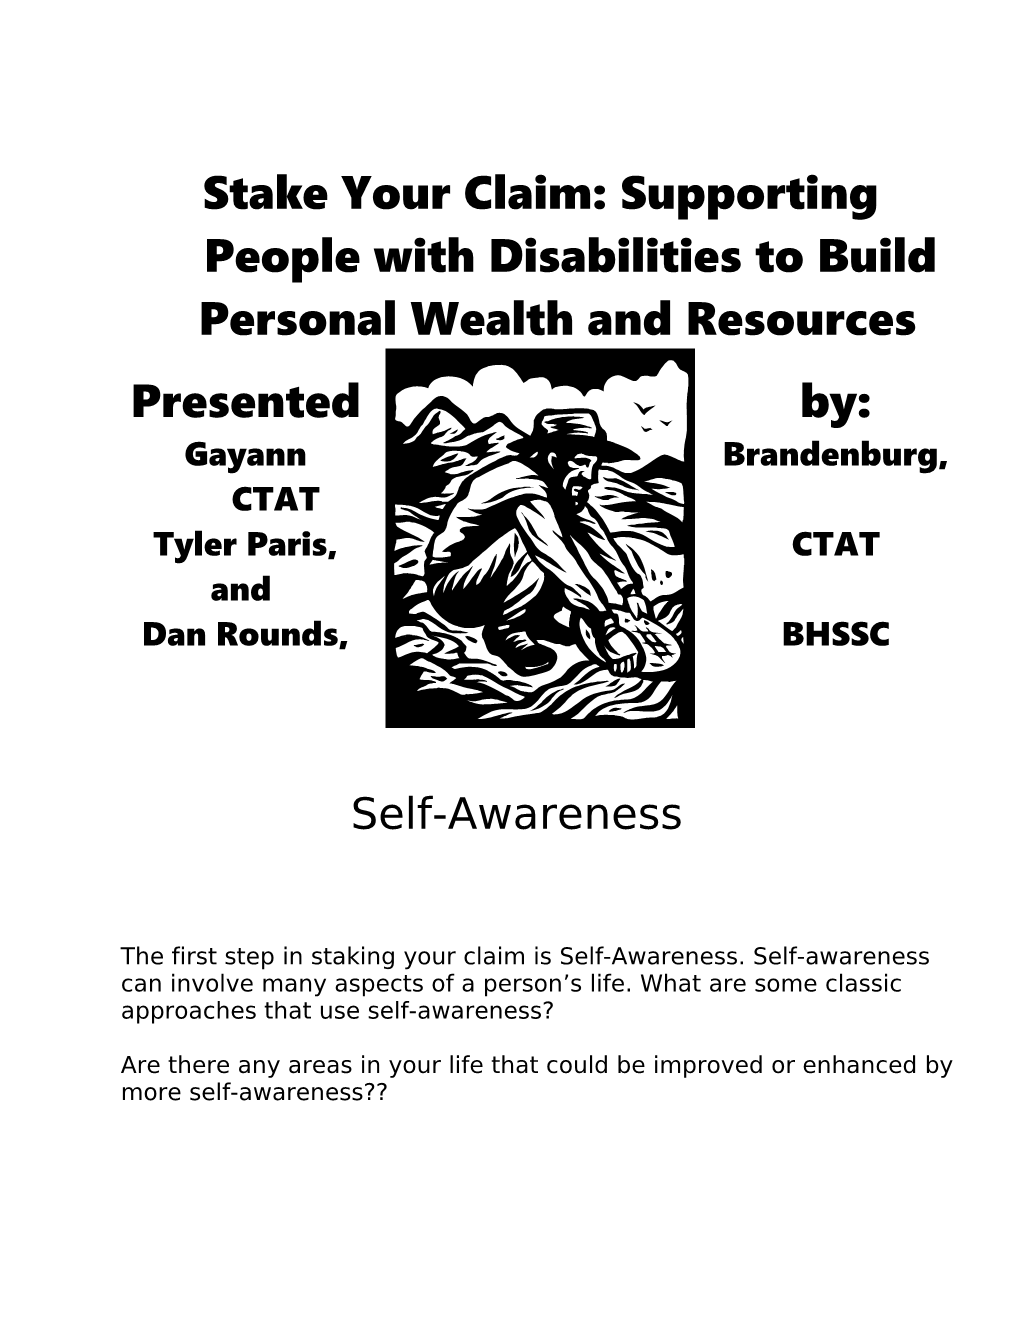 Stake Your Claim: Supporting People with Disabilities to Build Personal Wealth and Resources